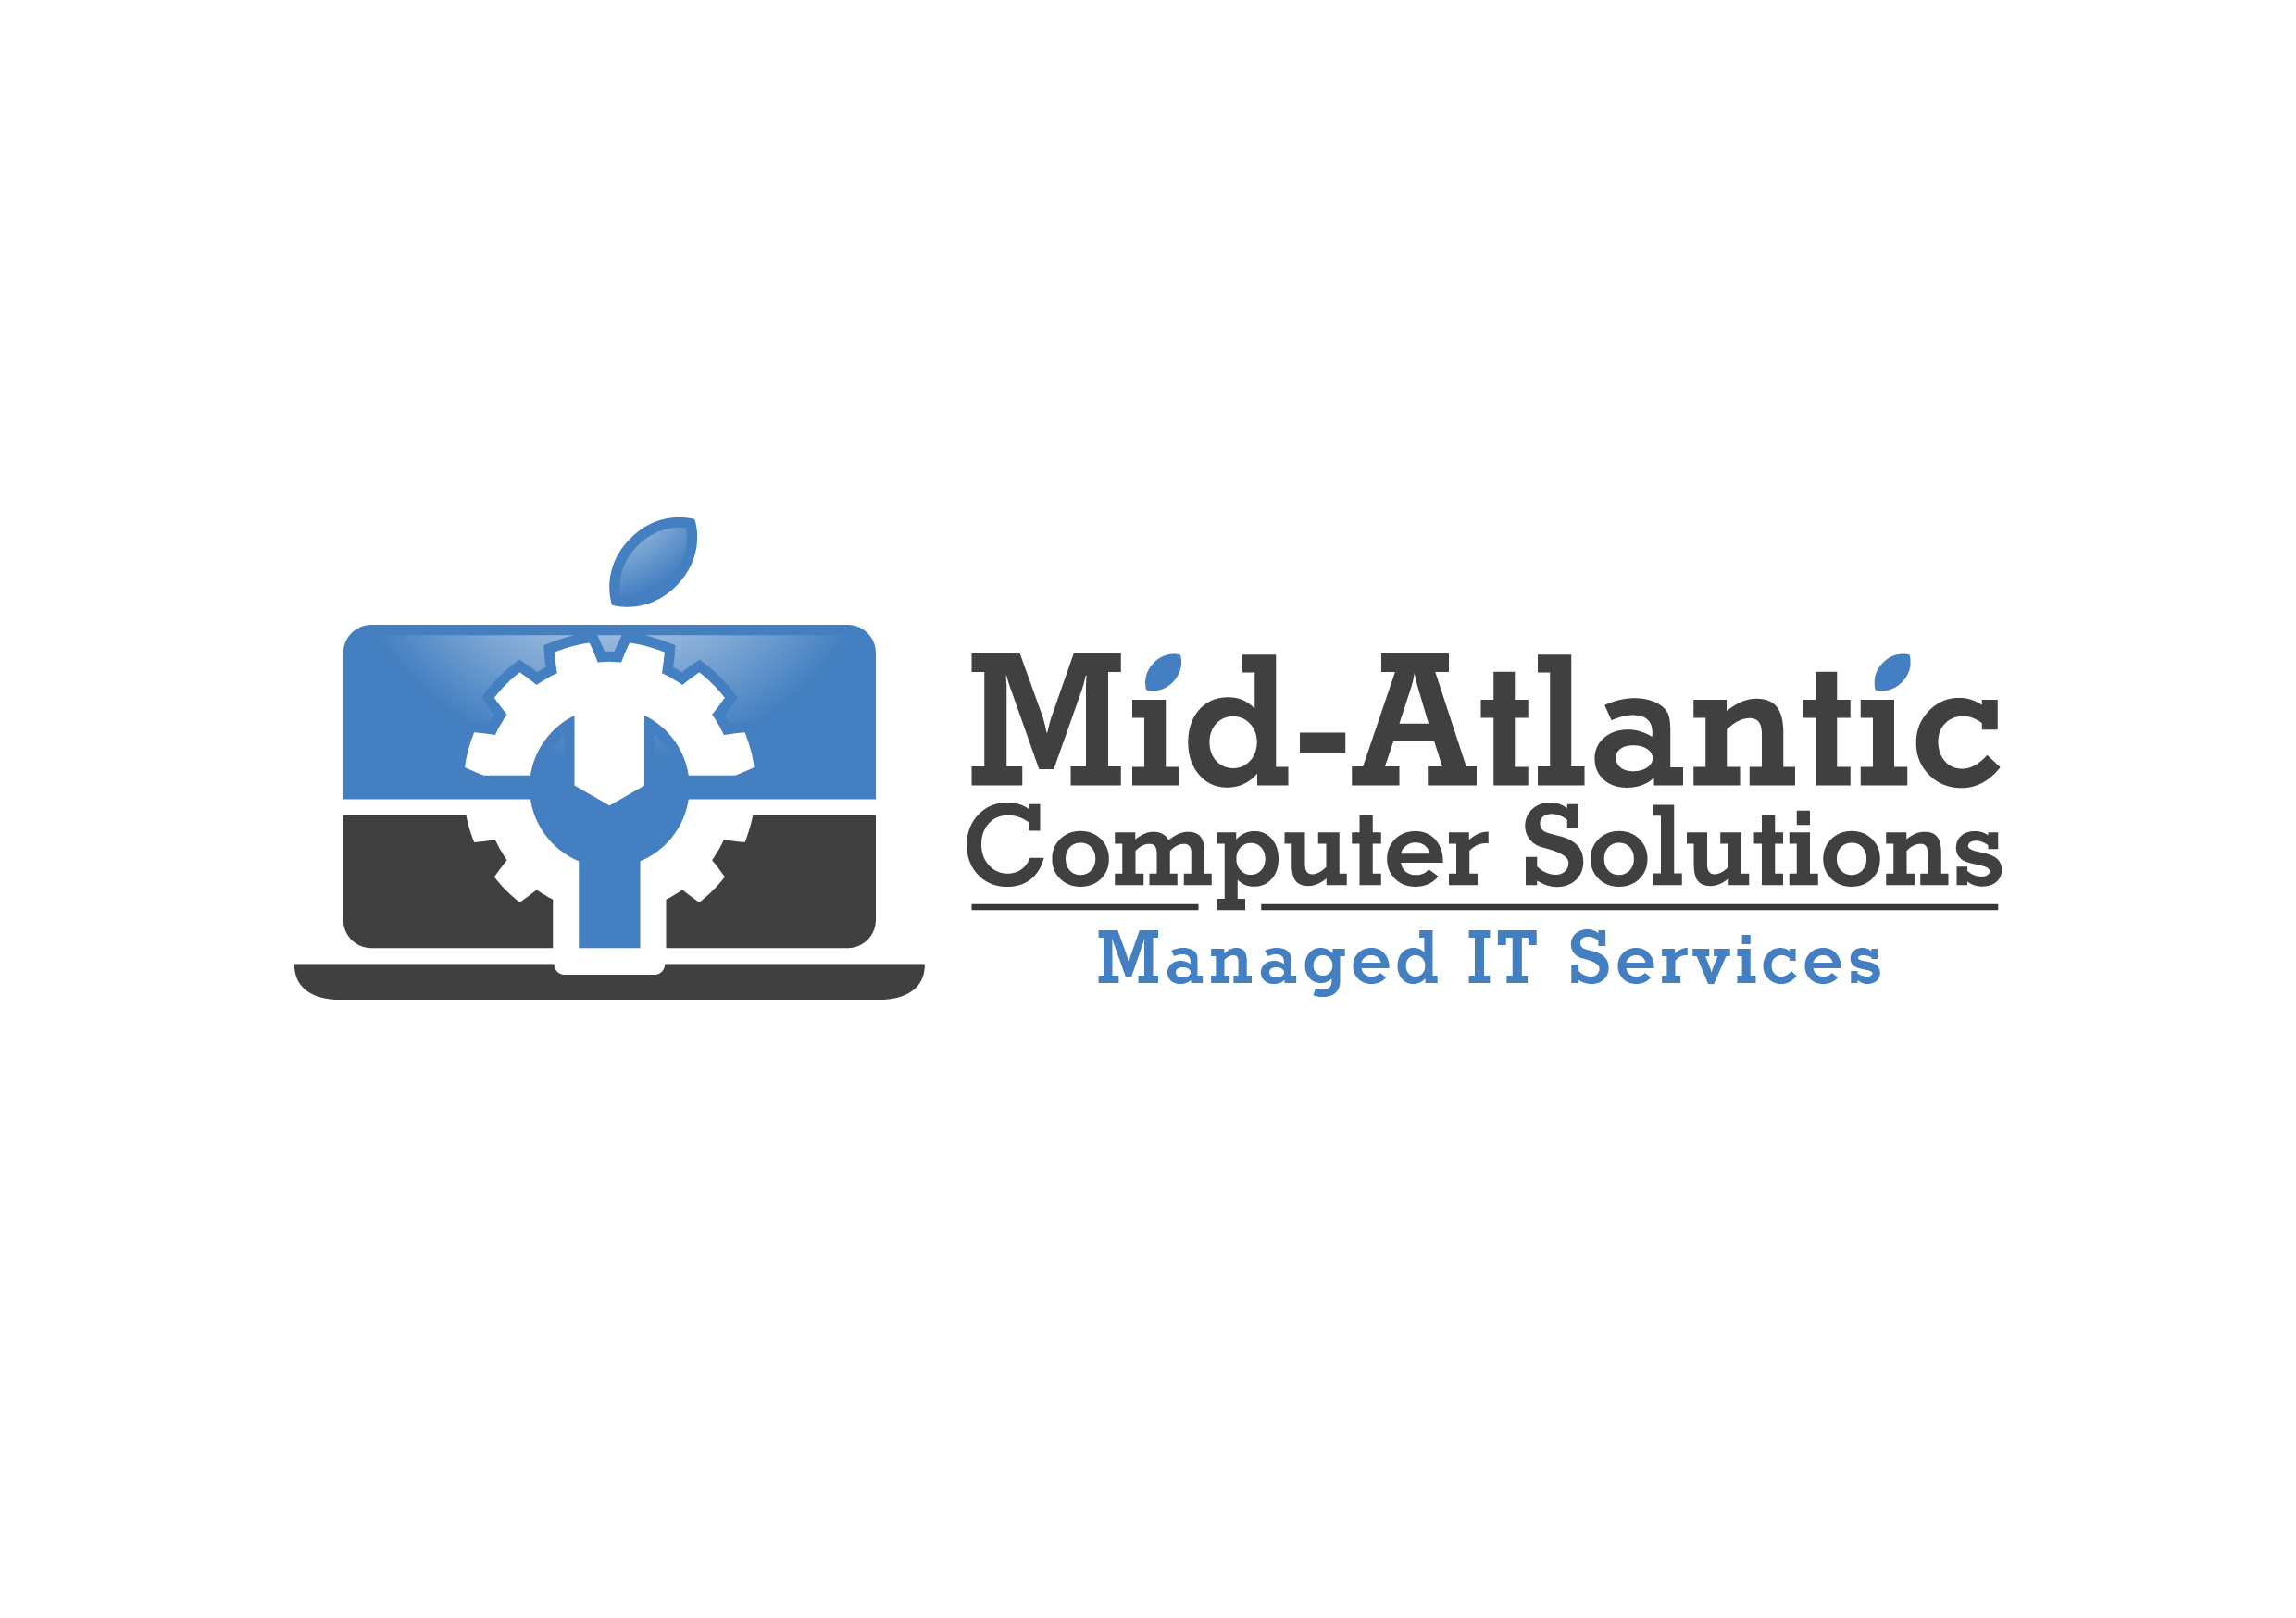 Mid-Atlantic Computer Solutions profile on Qualified.One